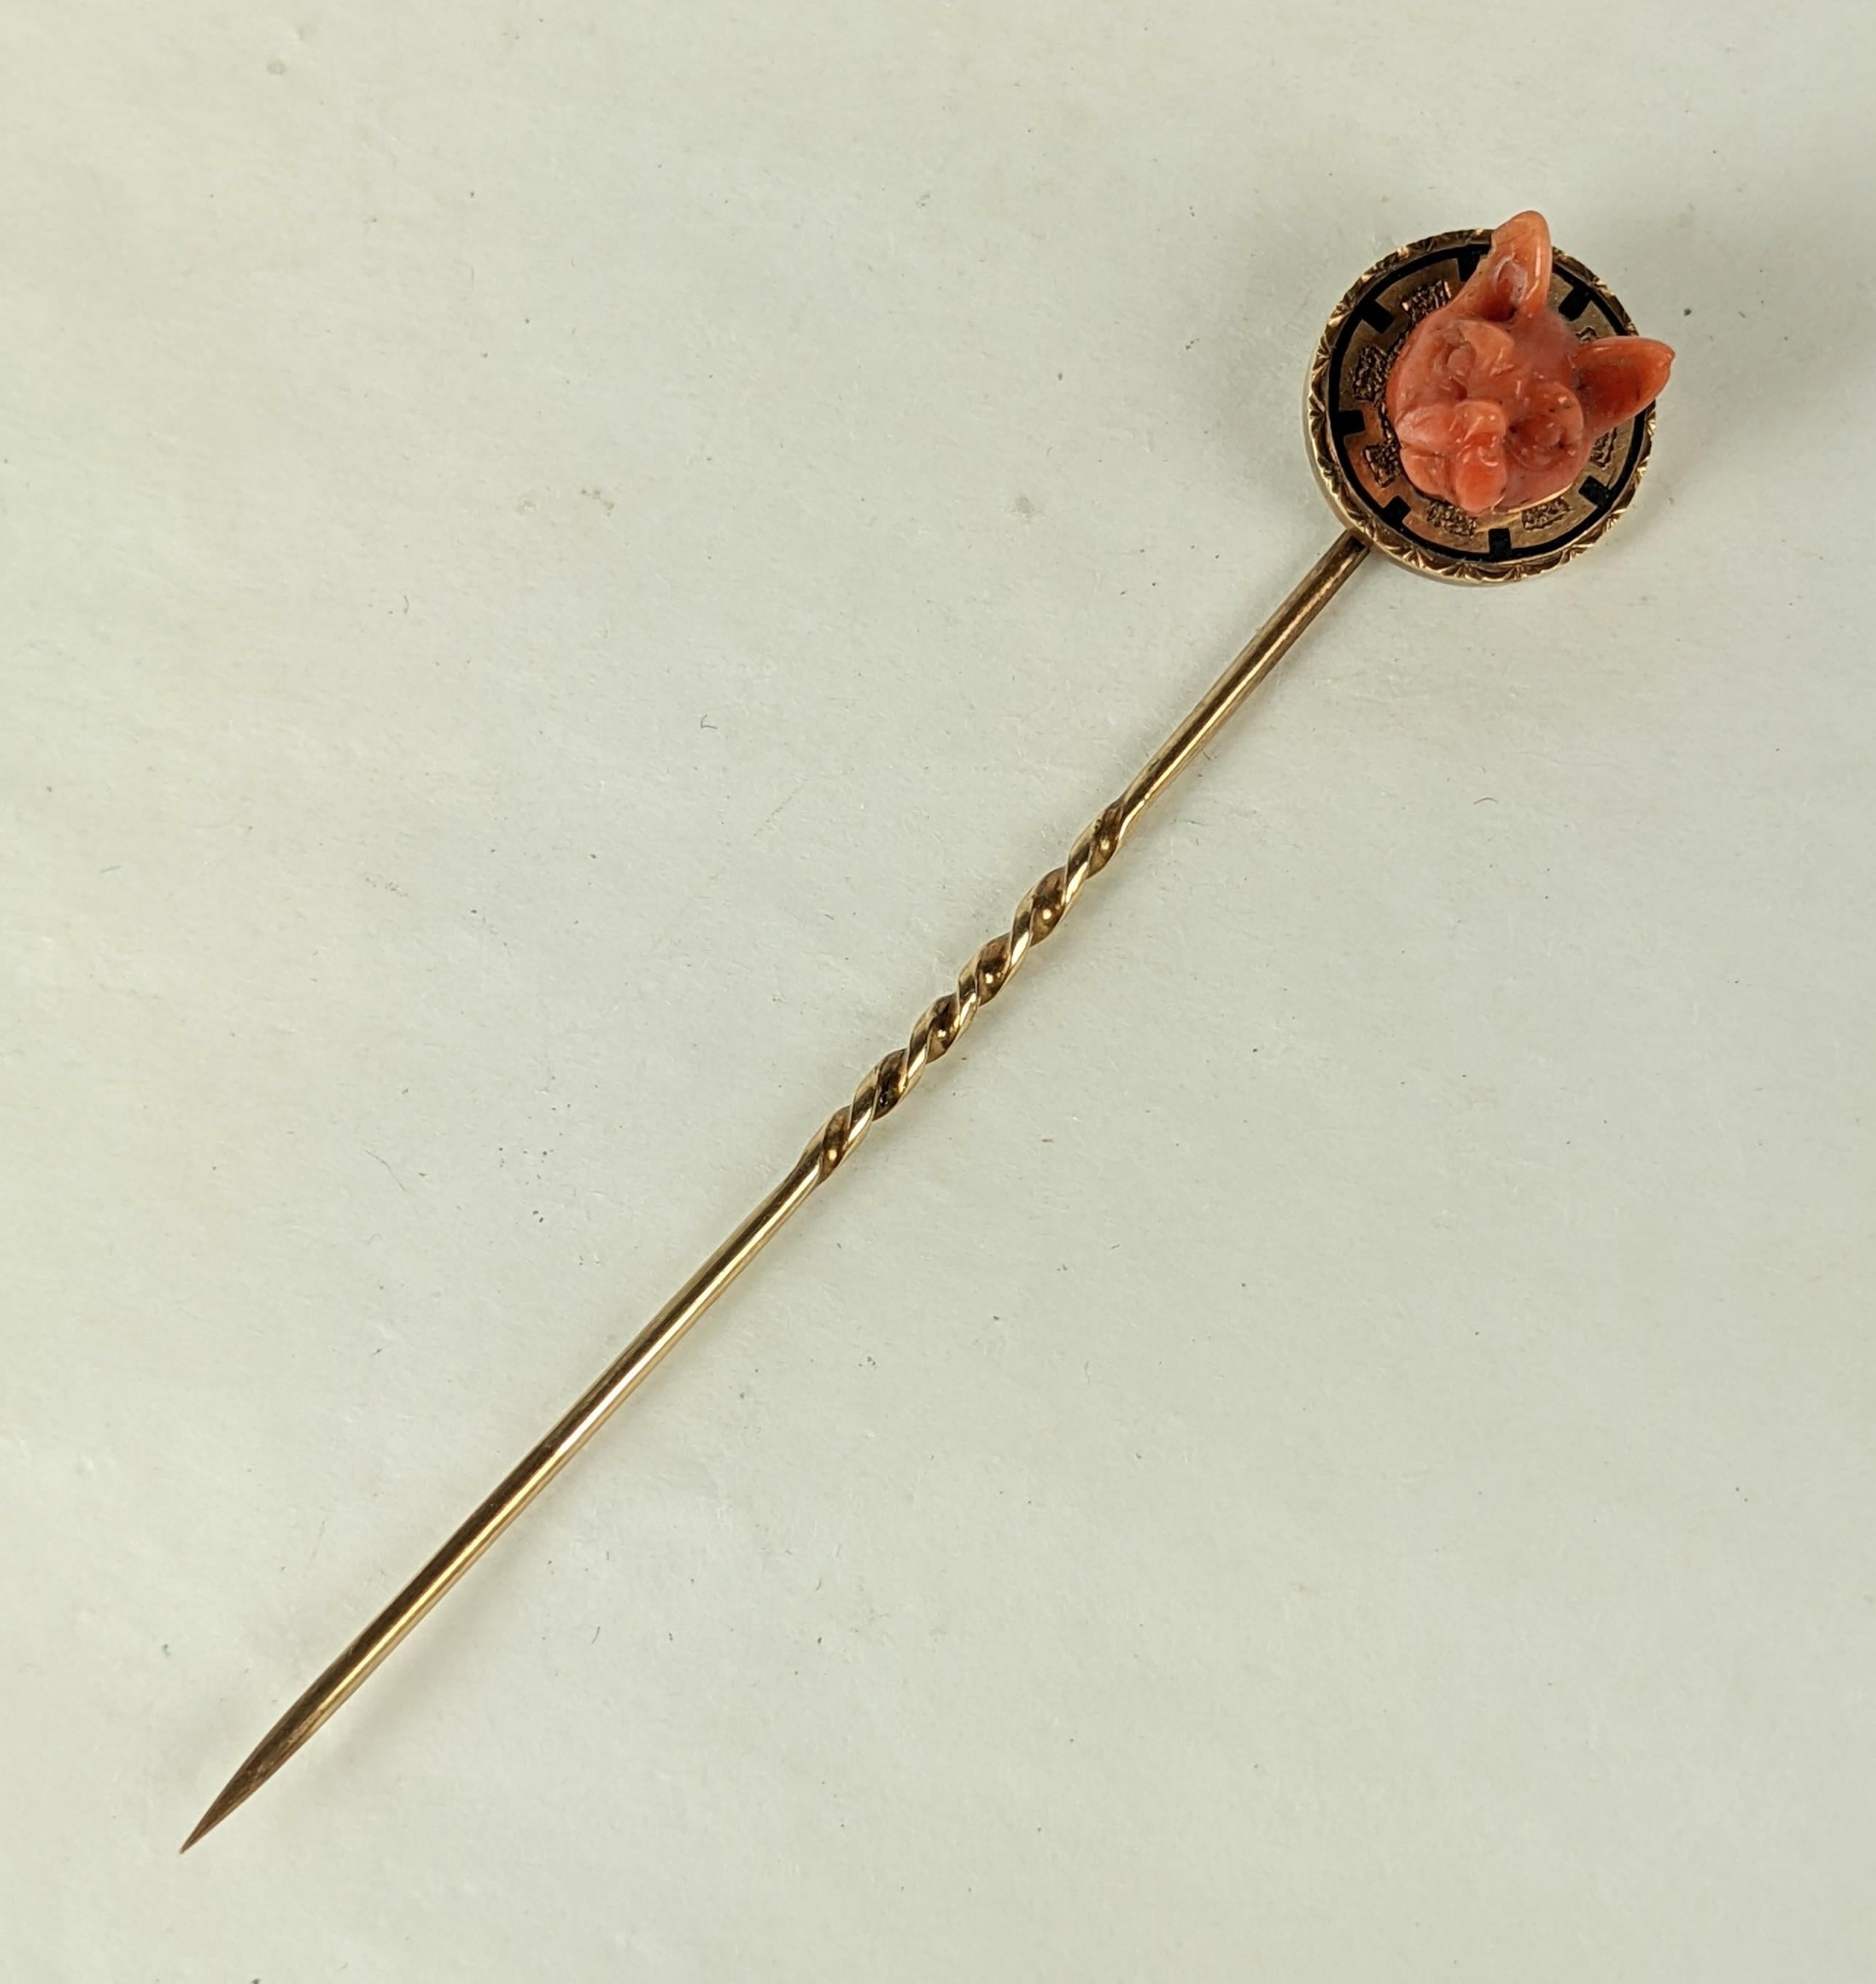 Lovely Victorian Coral Cat Stickpin from the 19th Century. A finely carved 3D cat's head is set on a gold round with black enamel detailing to look like a ruff or collar. 
Superb quality with unusual subject matter.  1870's USA.  .5